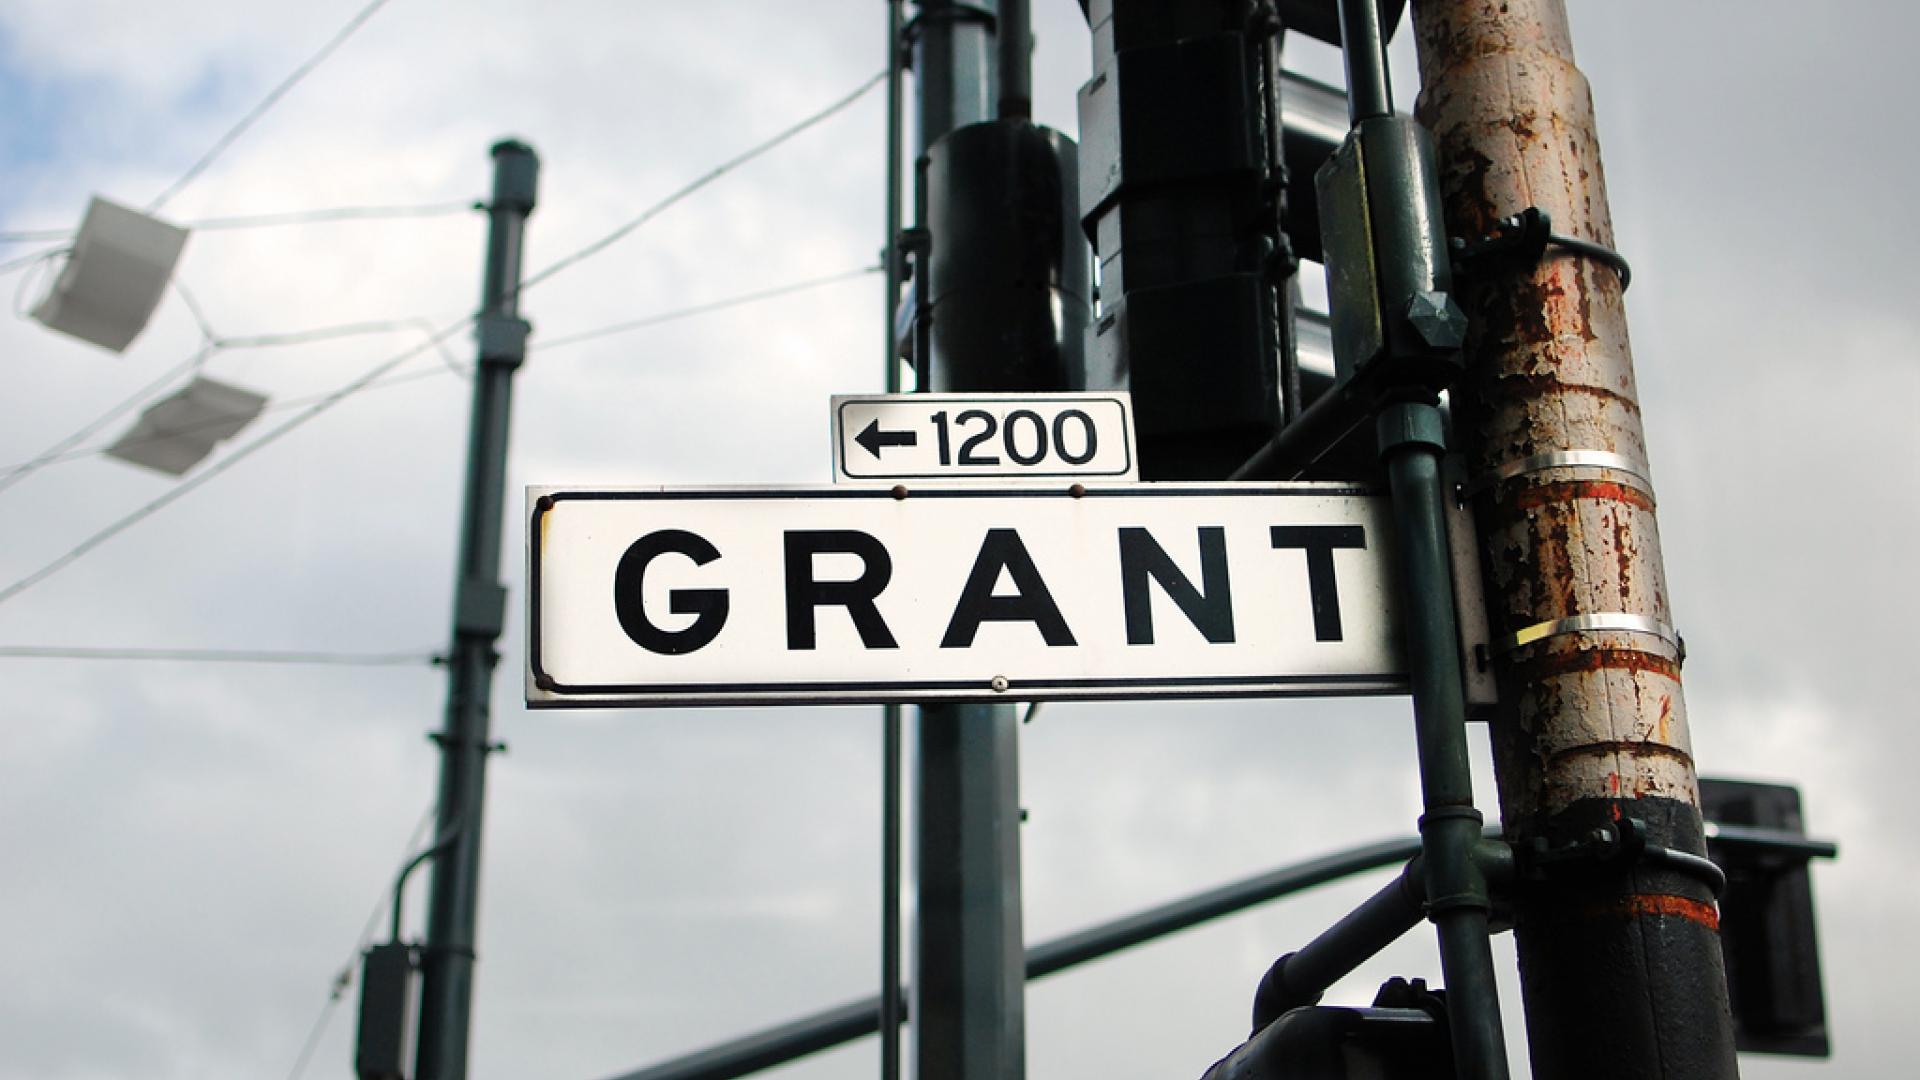 photo of Grant street sign in San Francisco